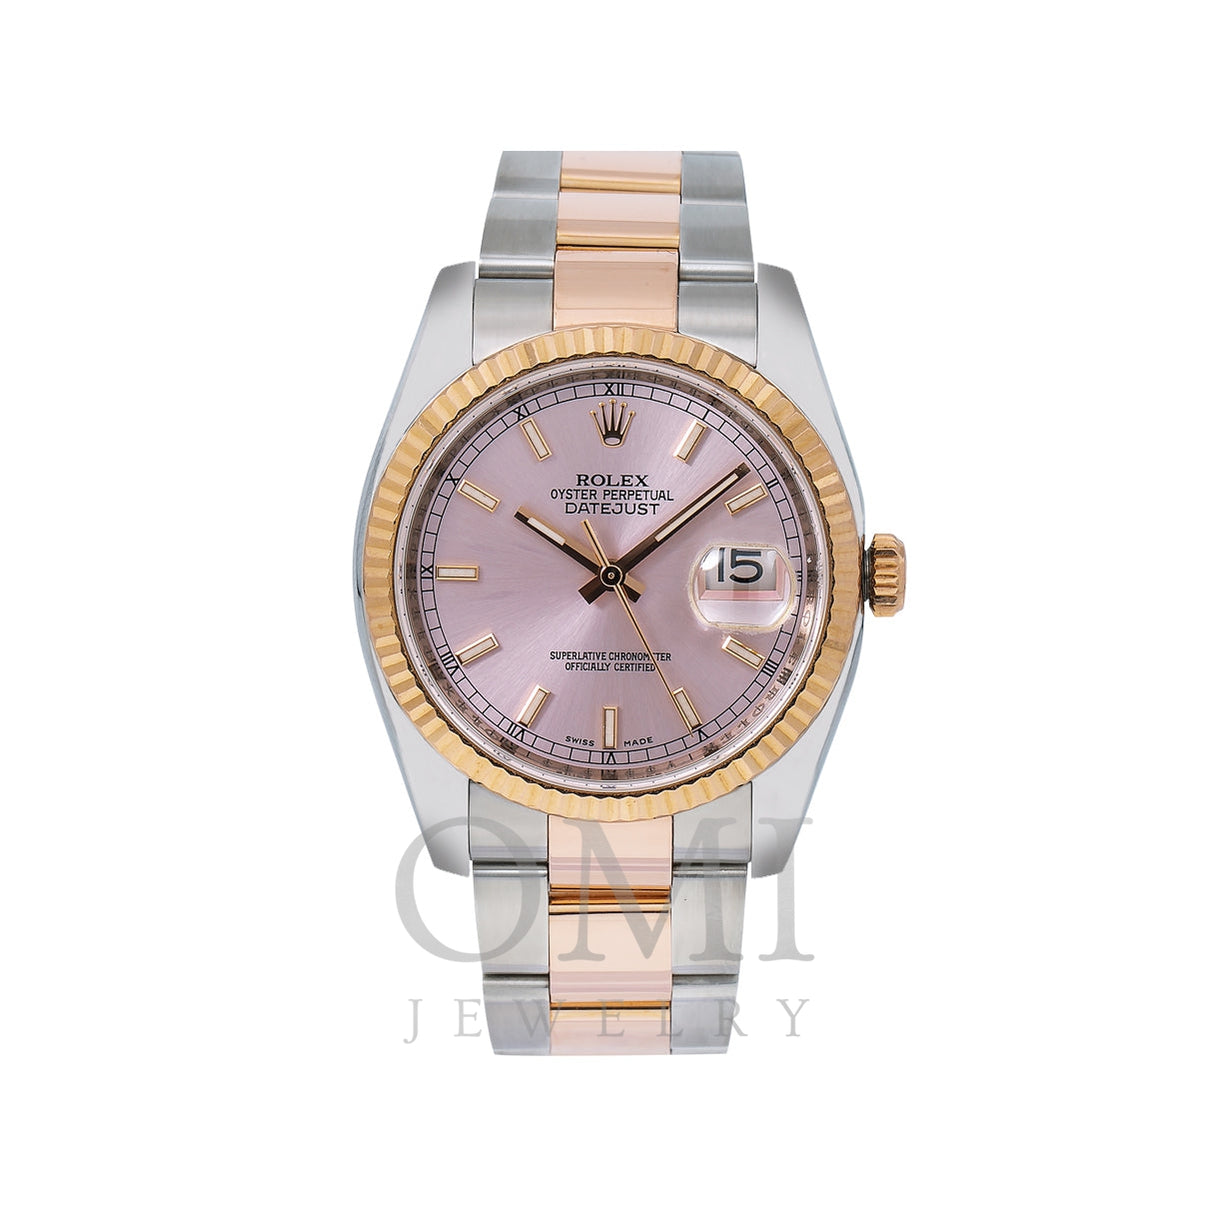 Rolex Datejust 116231 36mm 18k Rose Gold & Stainless Steel 